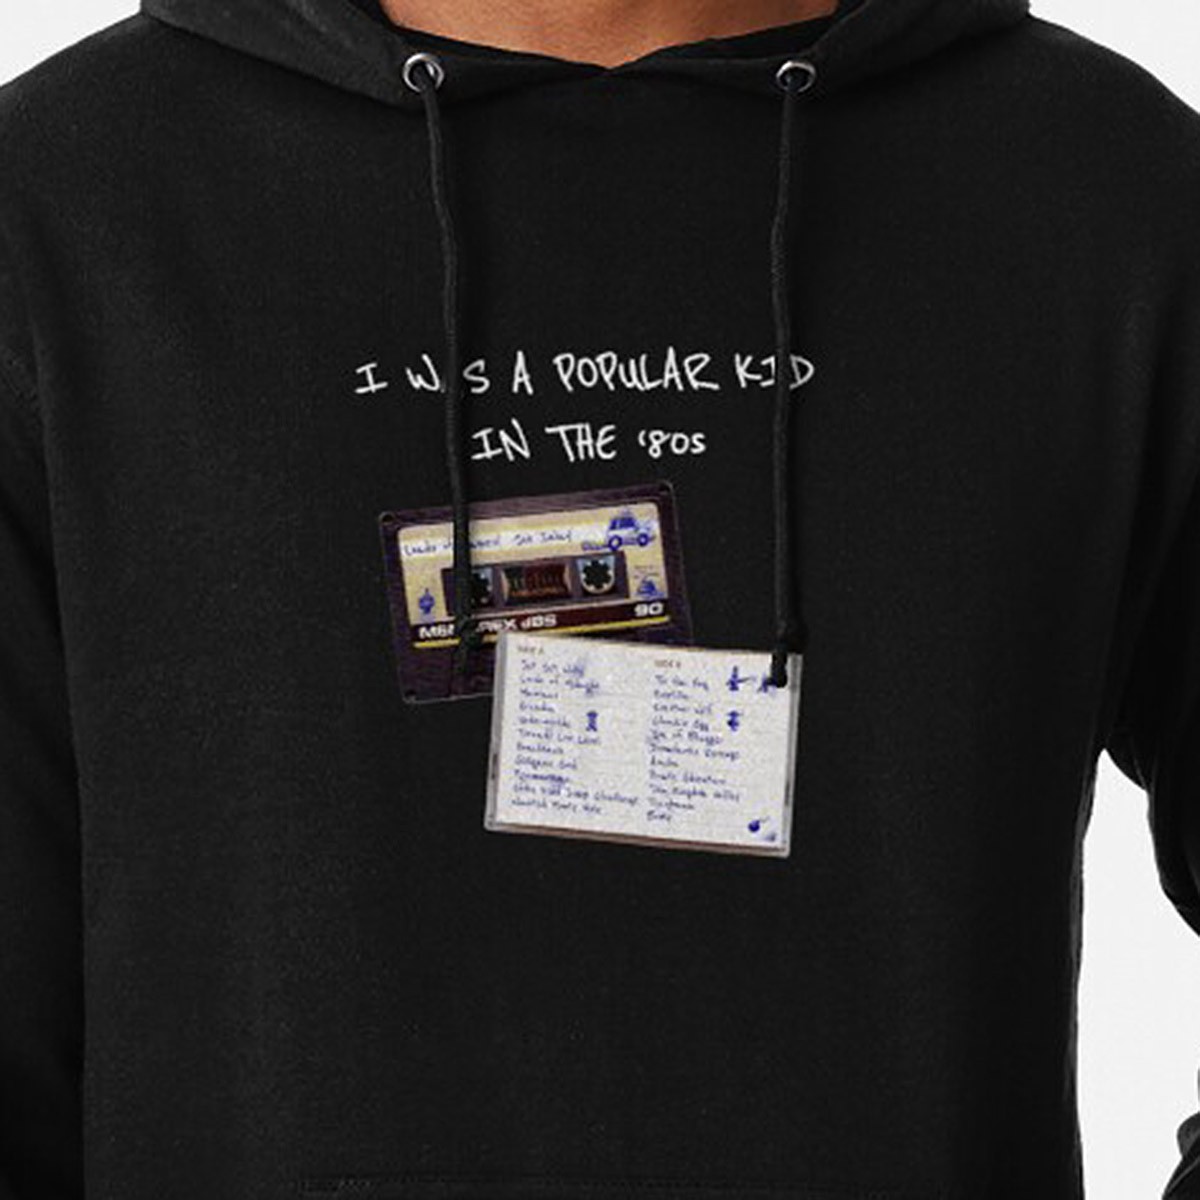 I Was a Popular Kid in the '80s! Lightweight Hoodie - 